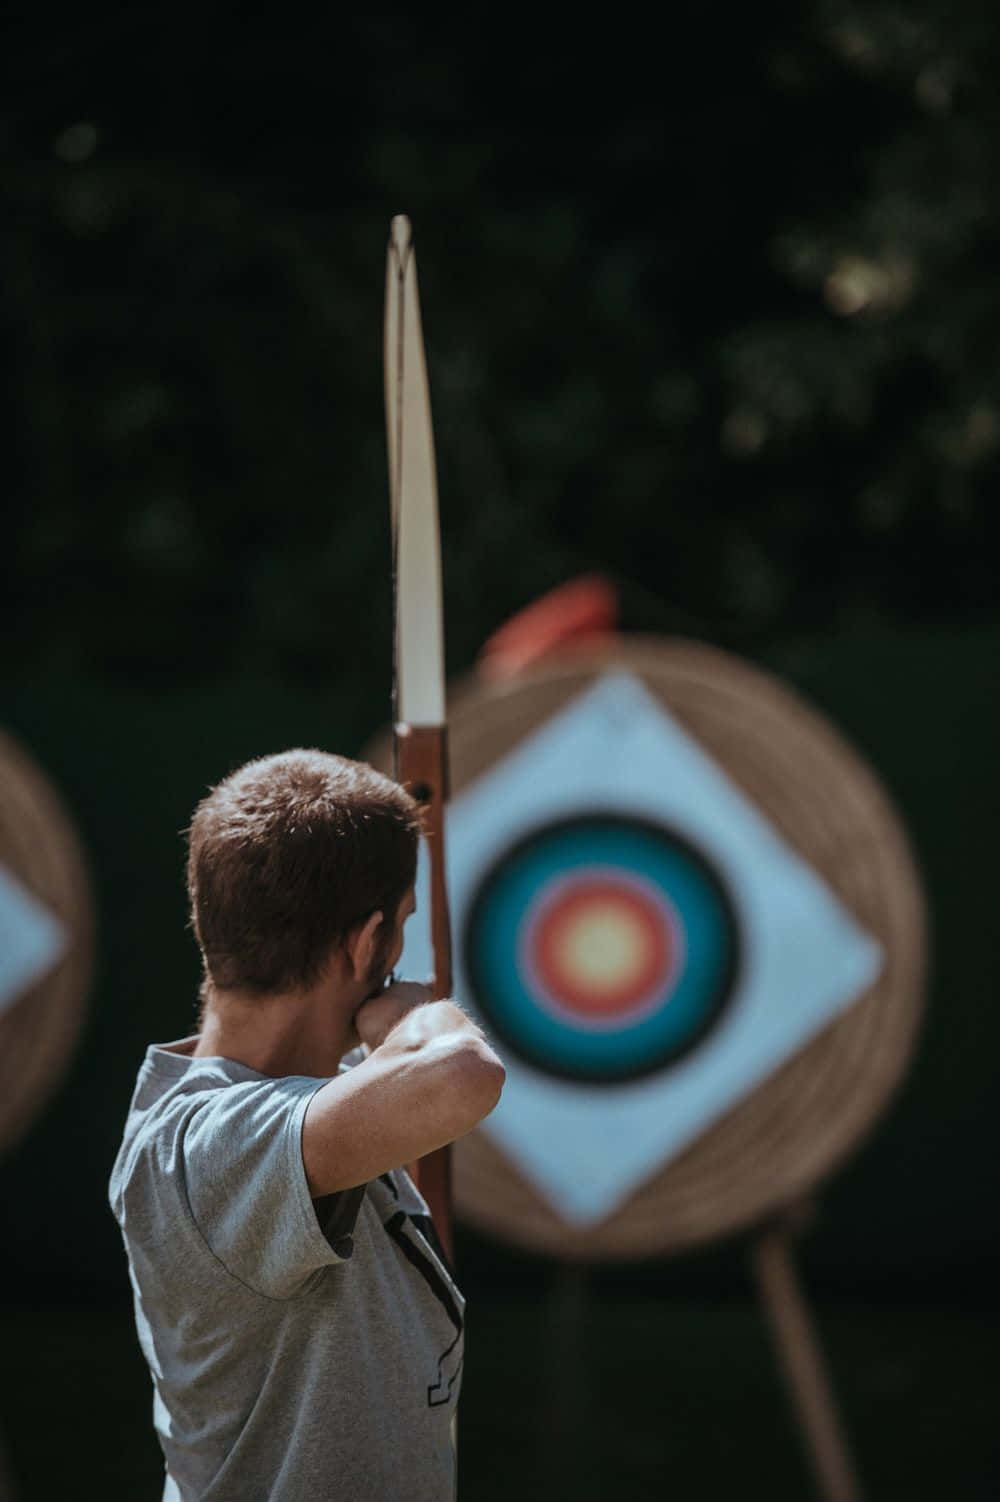 Aim for the Bullseye with the Challenge of Archery